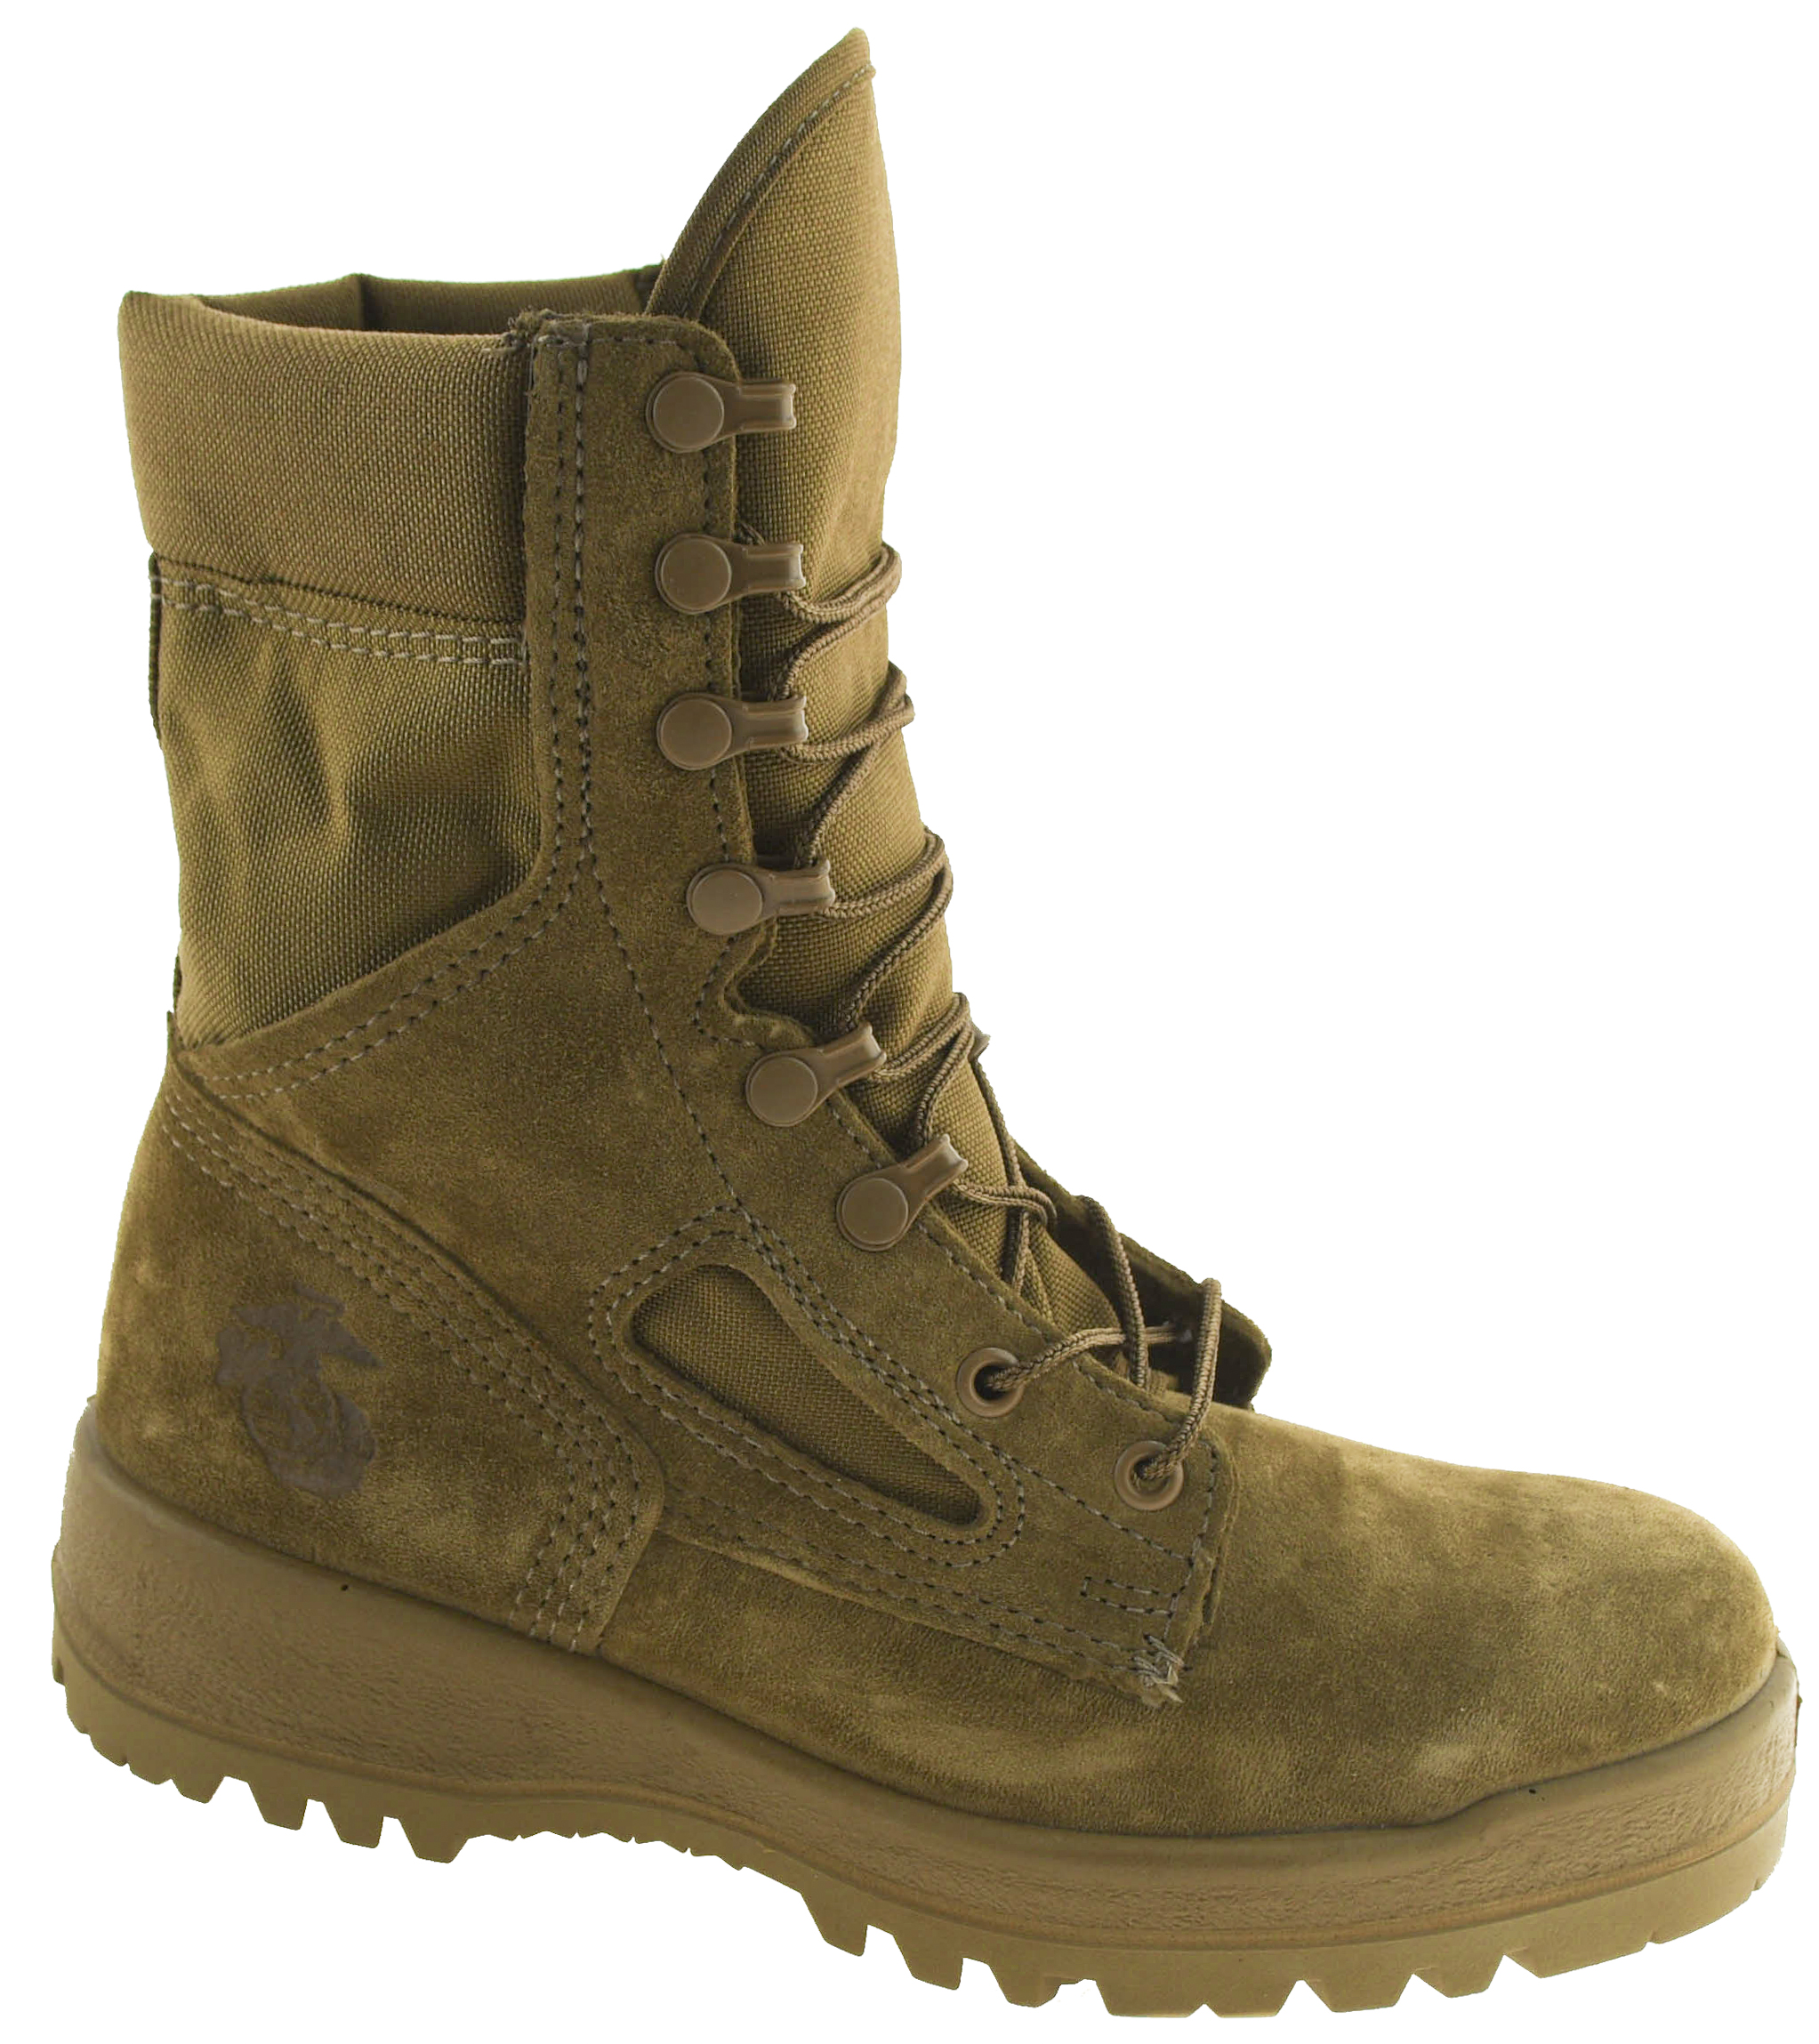 Bates Hot Weather Tactical Work Boots Olive E25502B | eBay